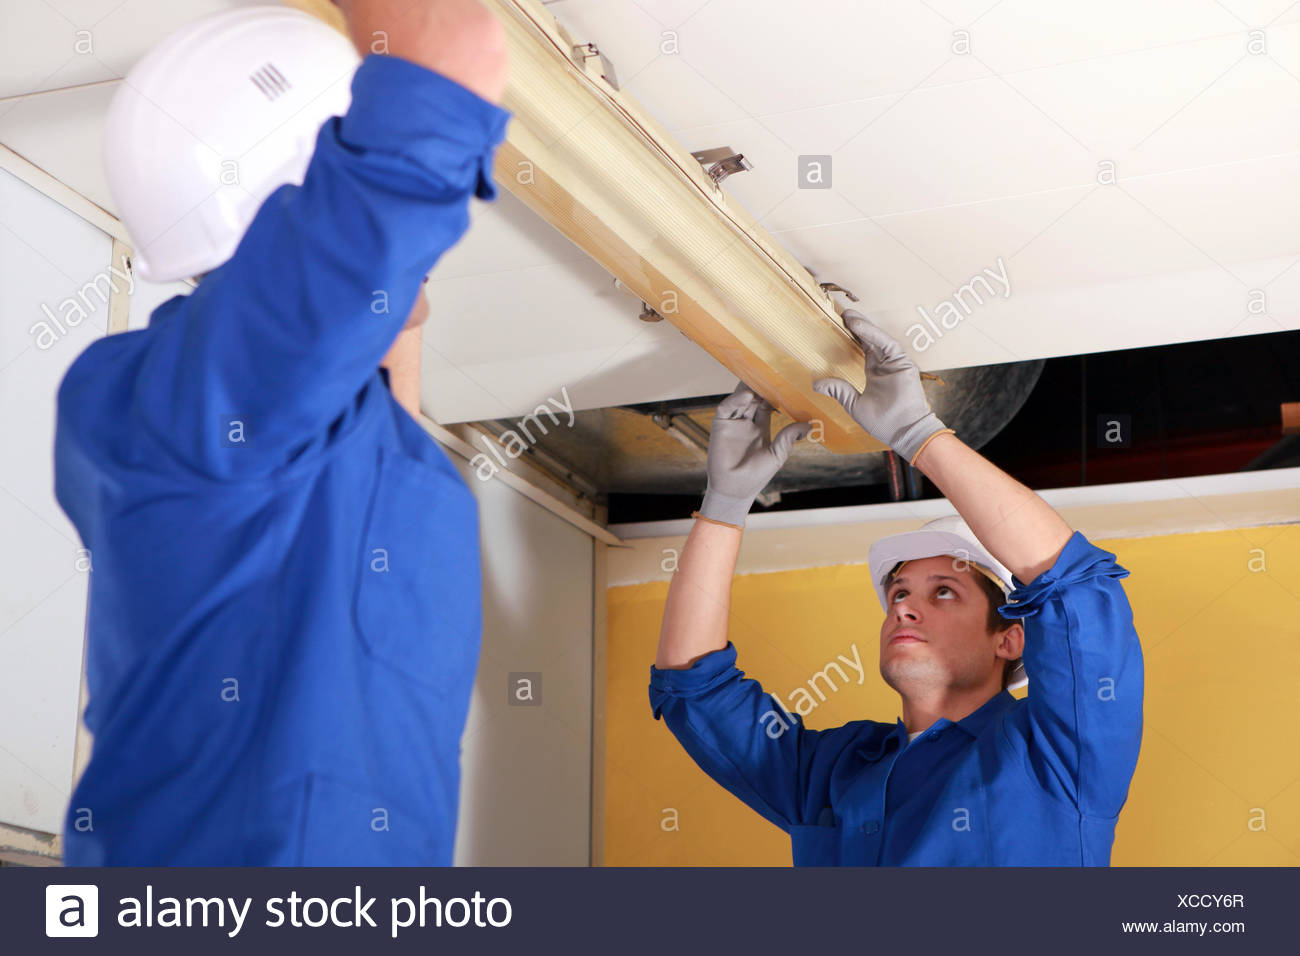 Electricians Fixing Neon On The Ceiling Stock Photo 283026543 Alamy